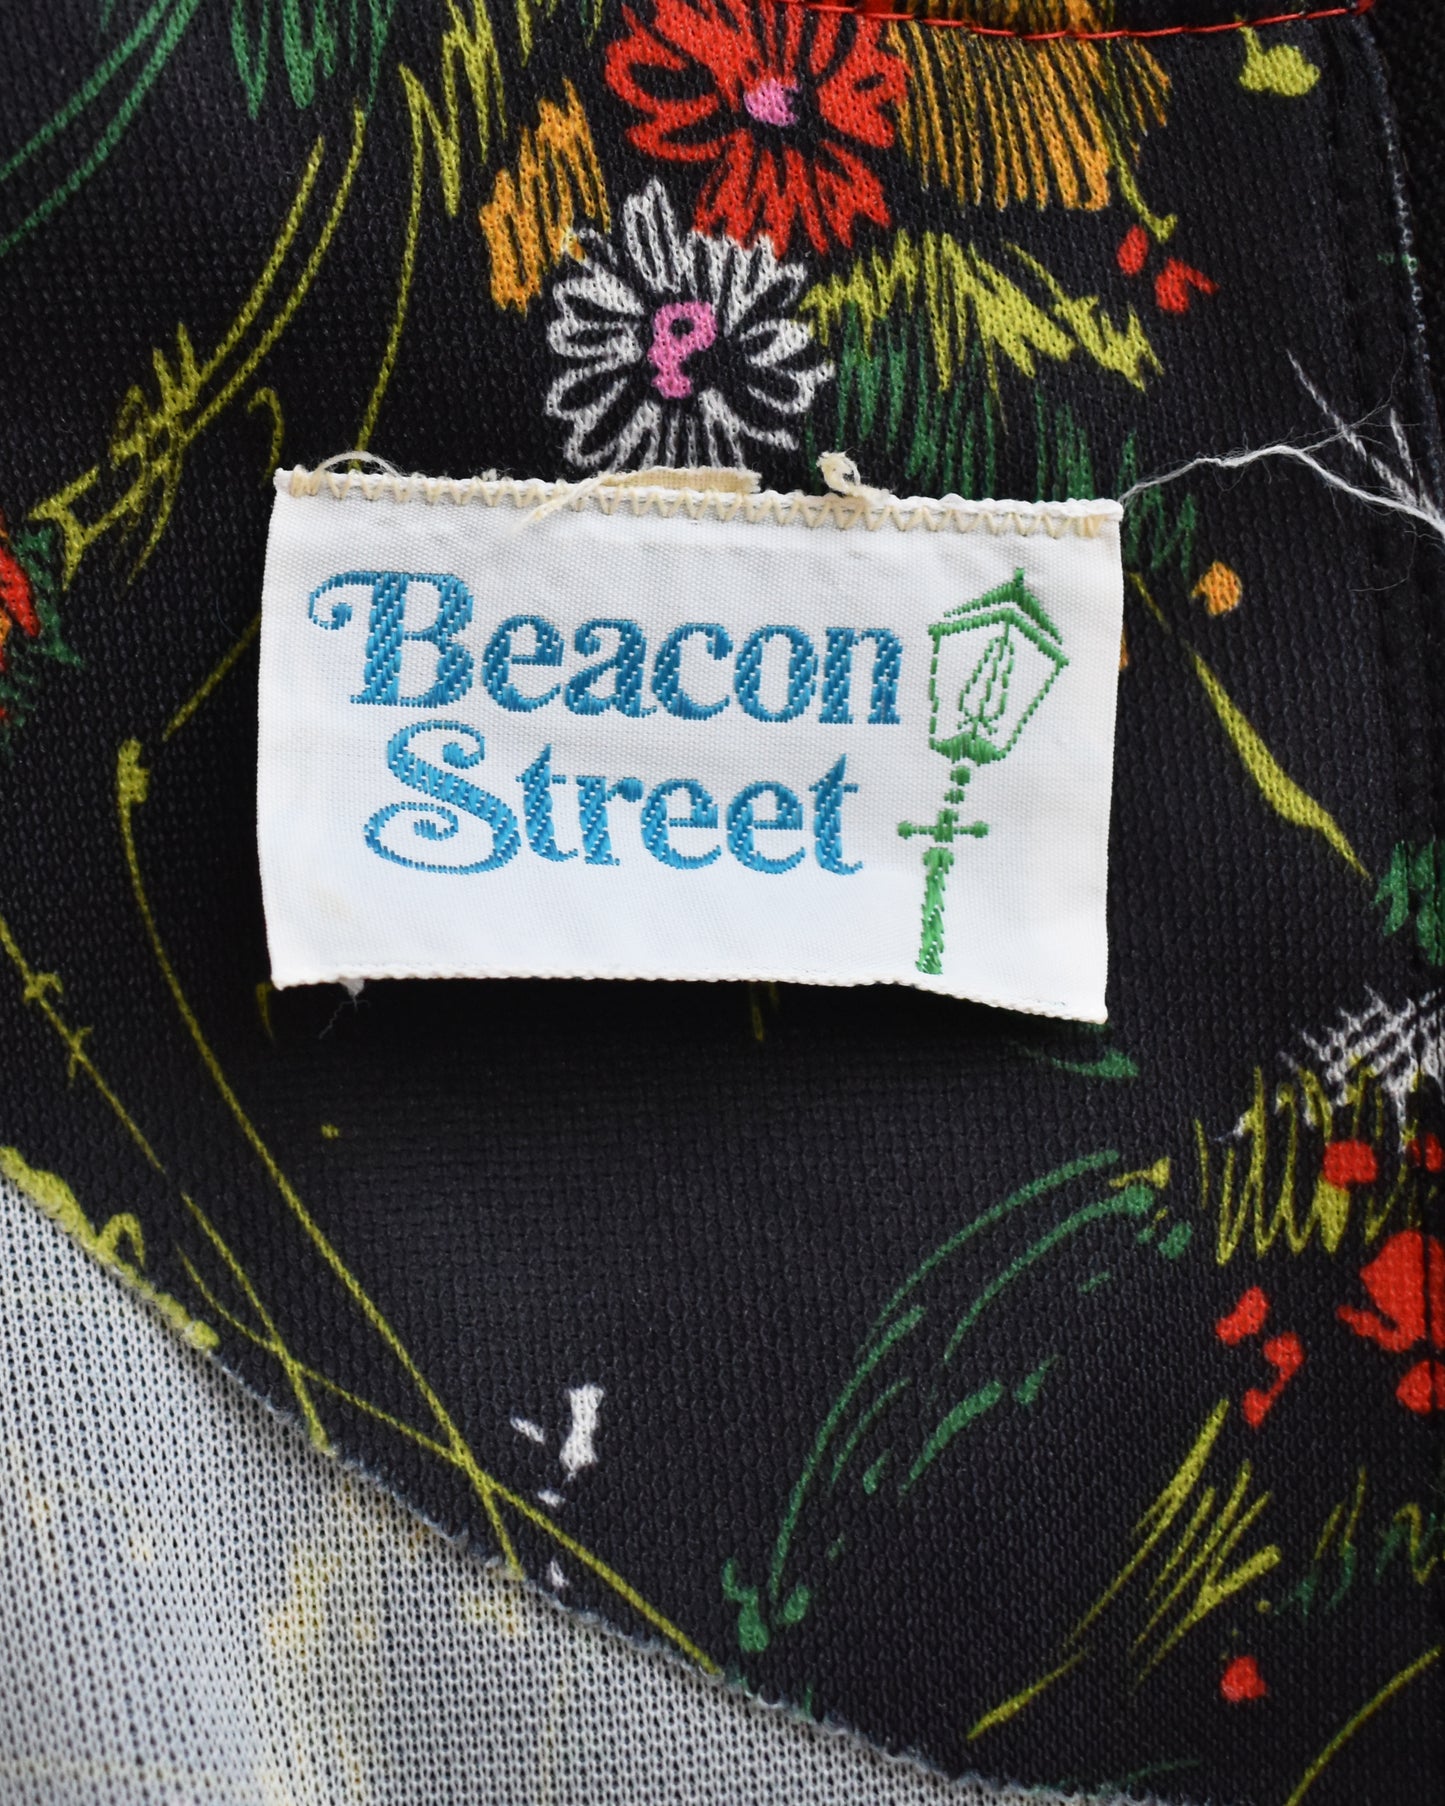 close up of the tag that says Beacon Street